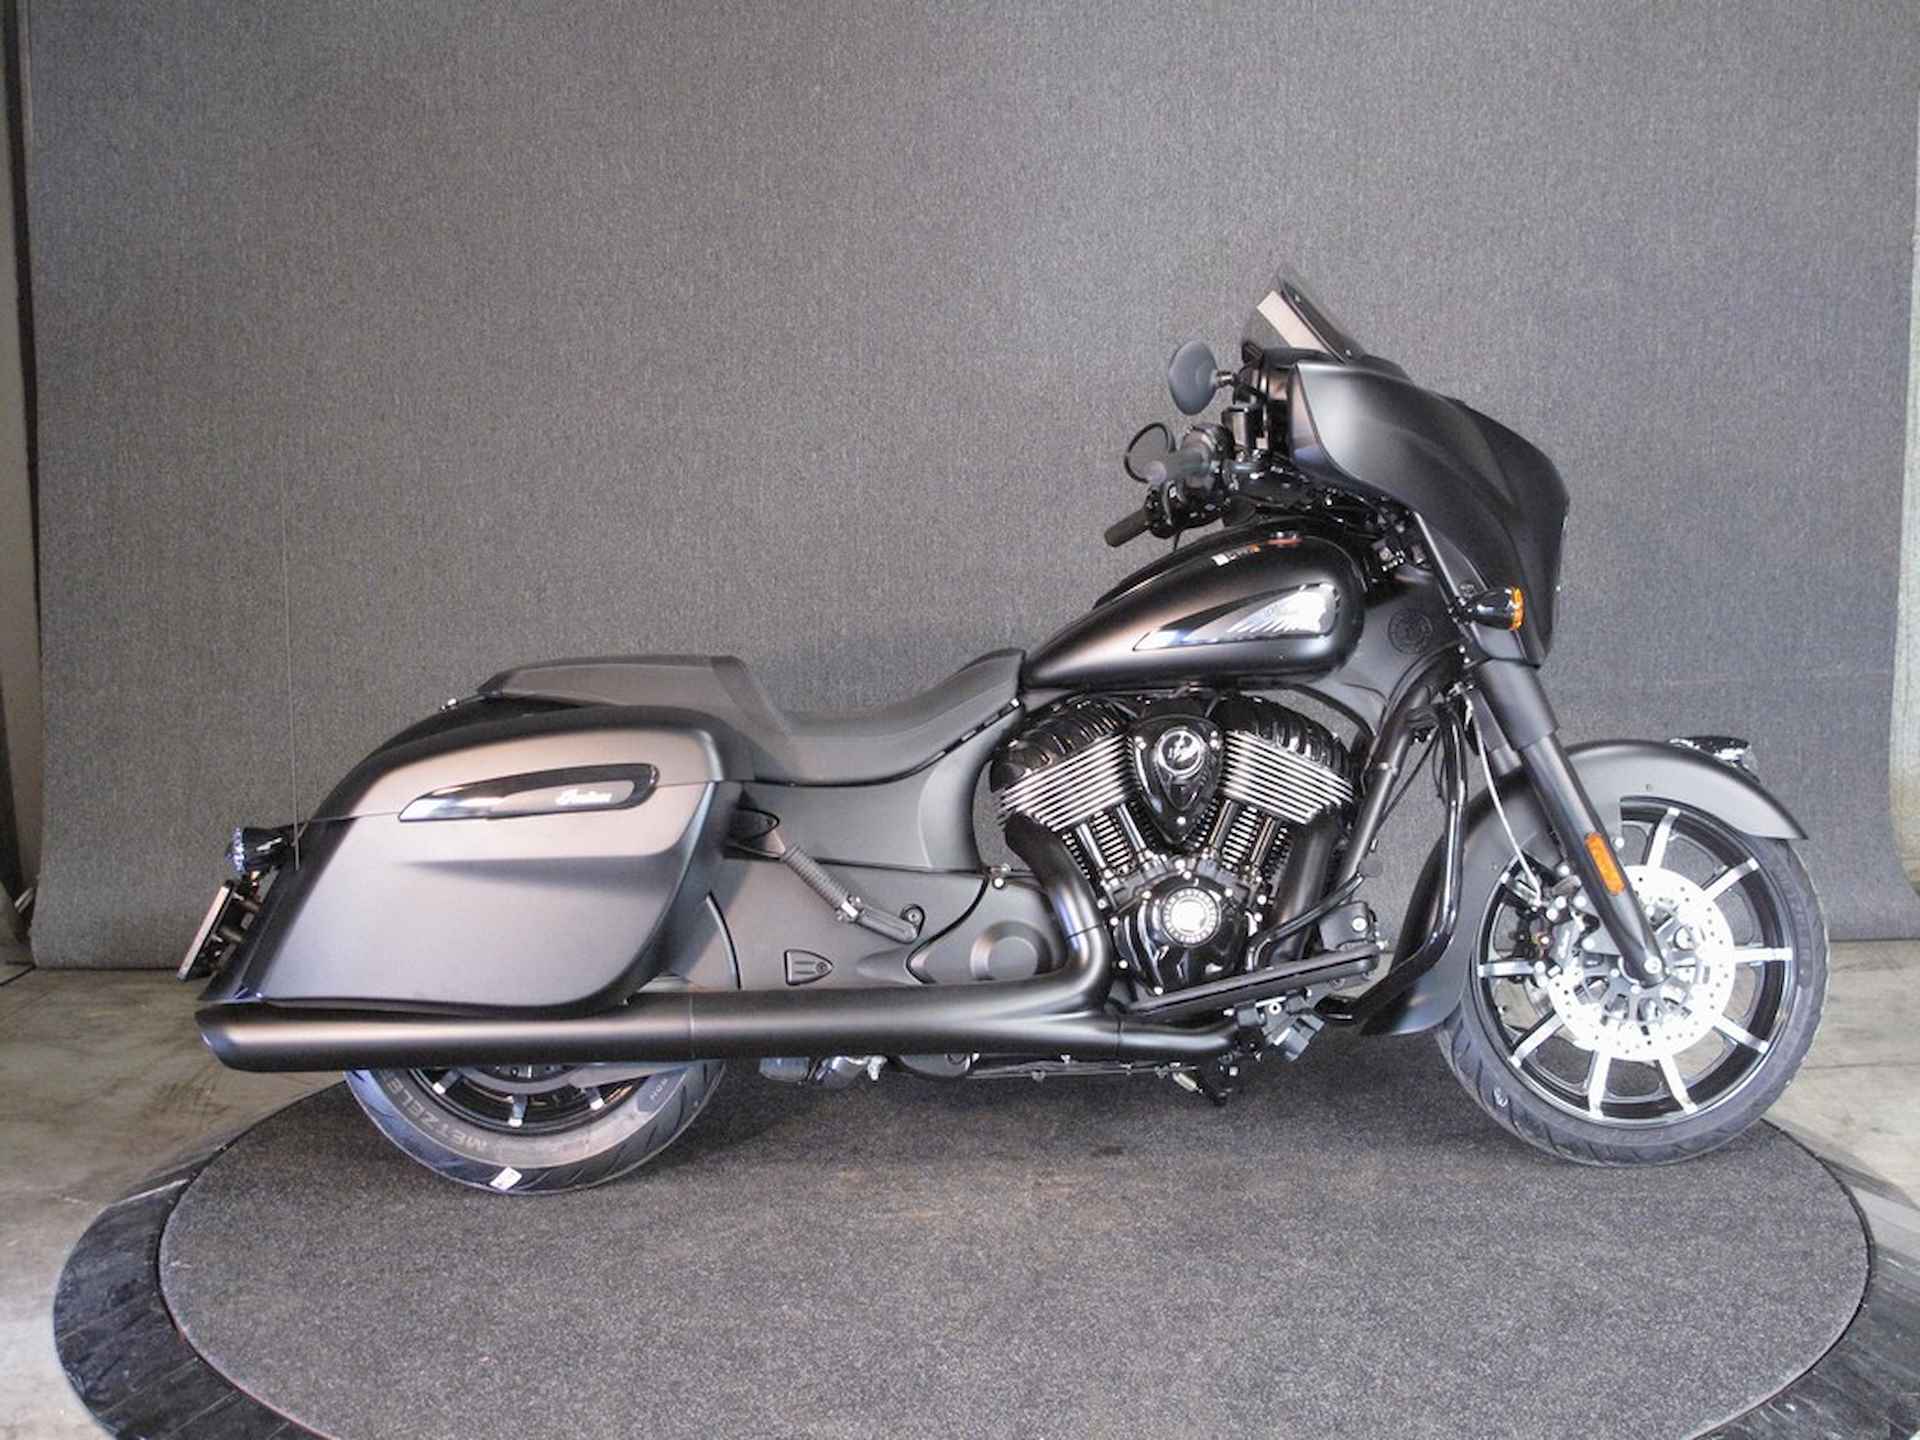 Indian Chieftain Dark Horse Official Indian Motorcycle Dealer - 5/17